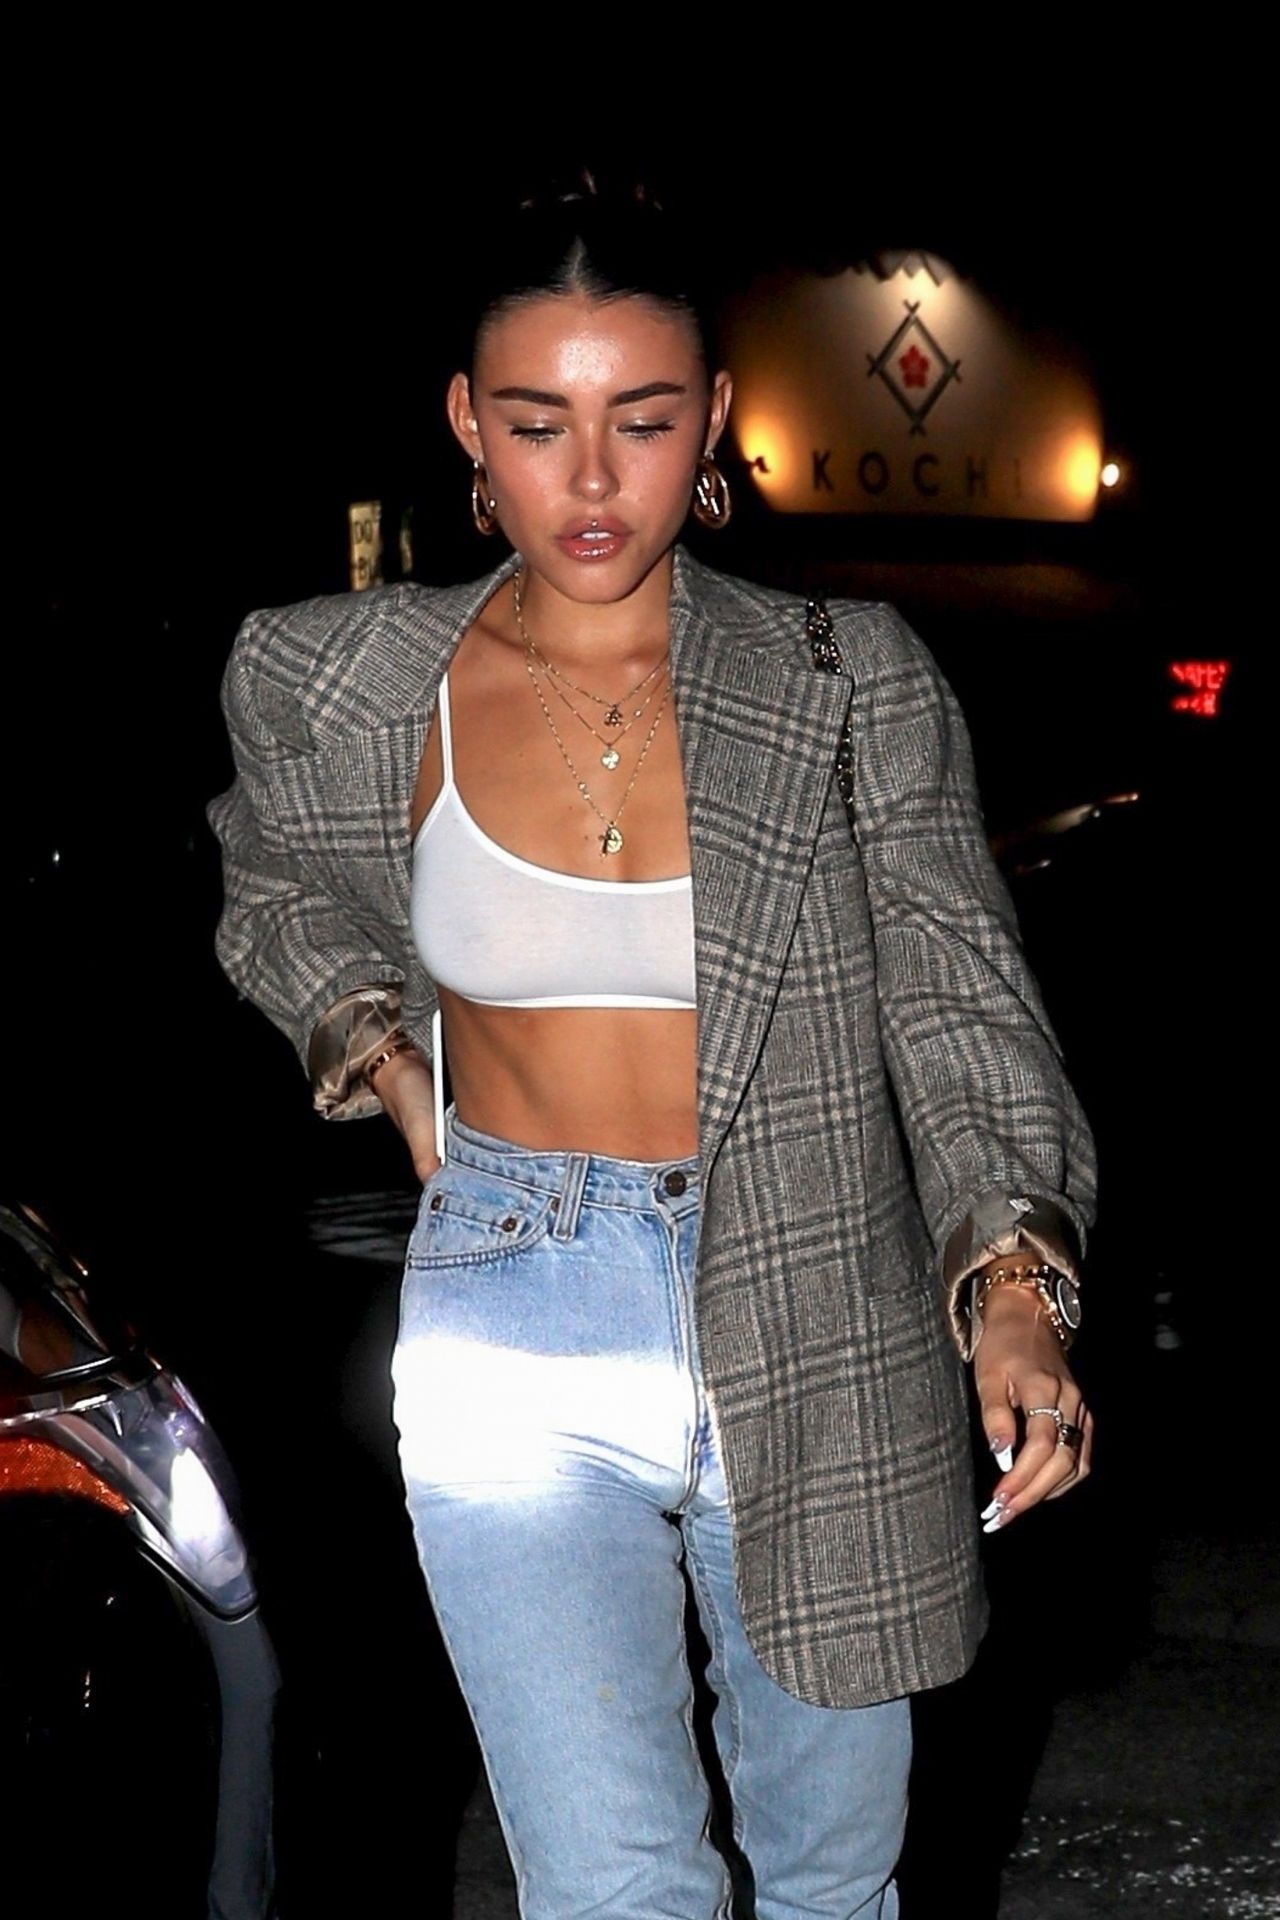 Madison Beer The Nice Guy December 26, 2017 – Star Style